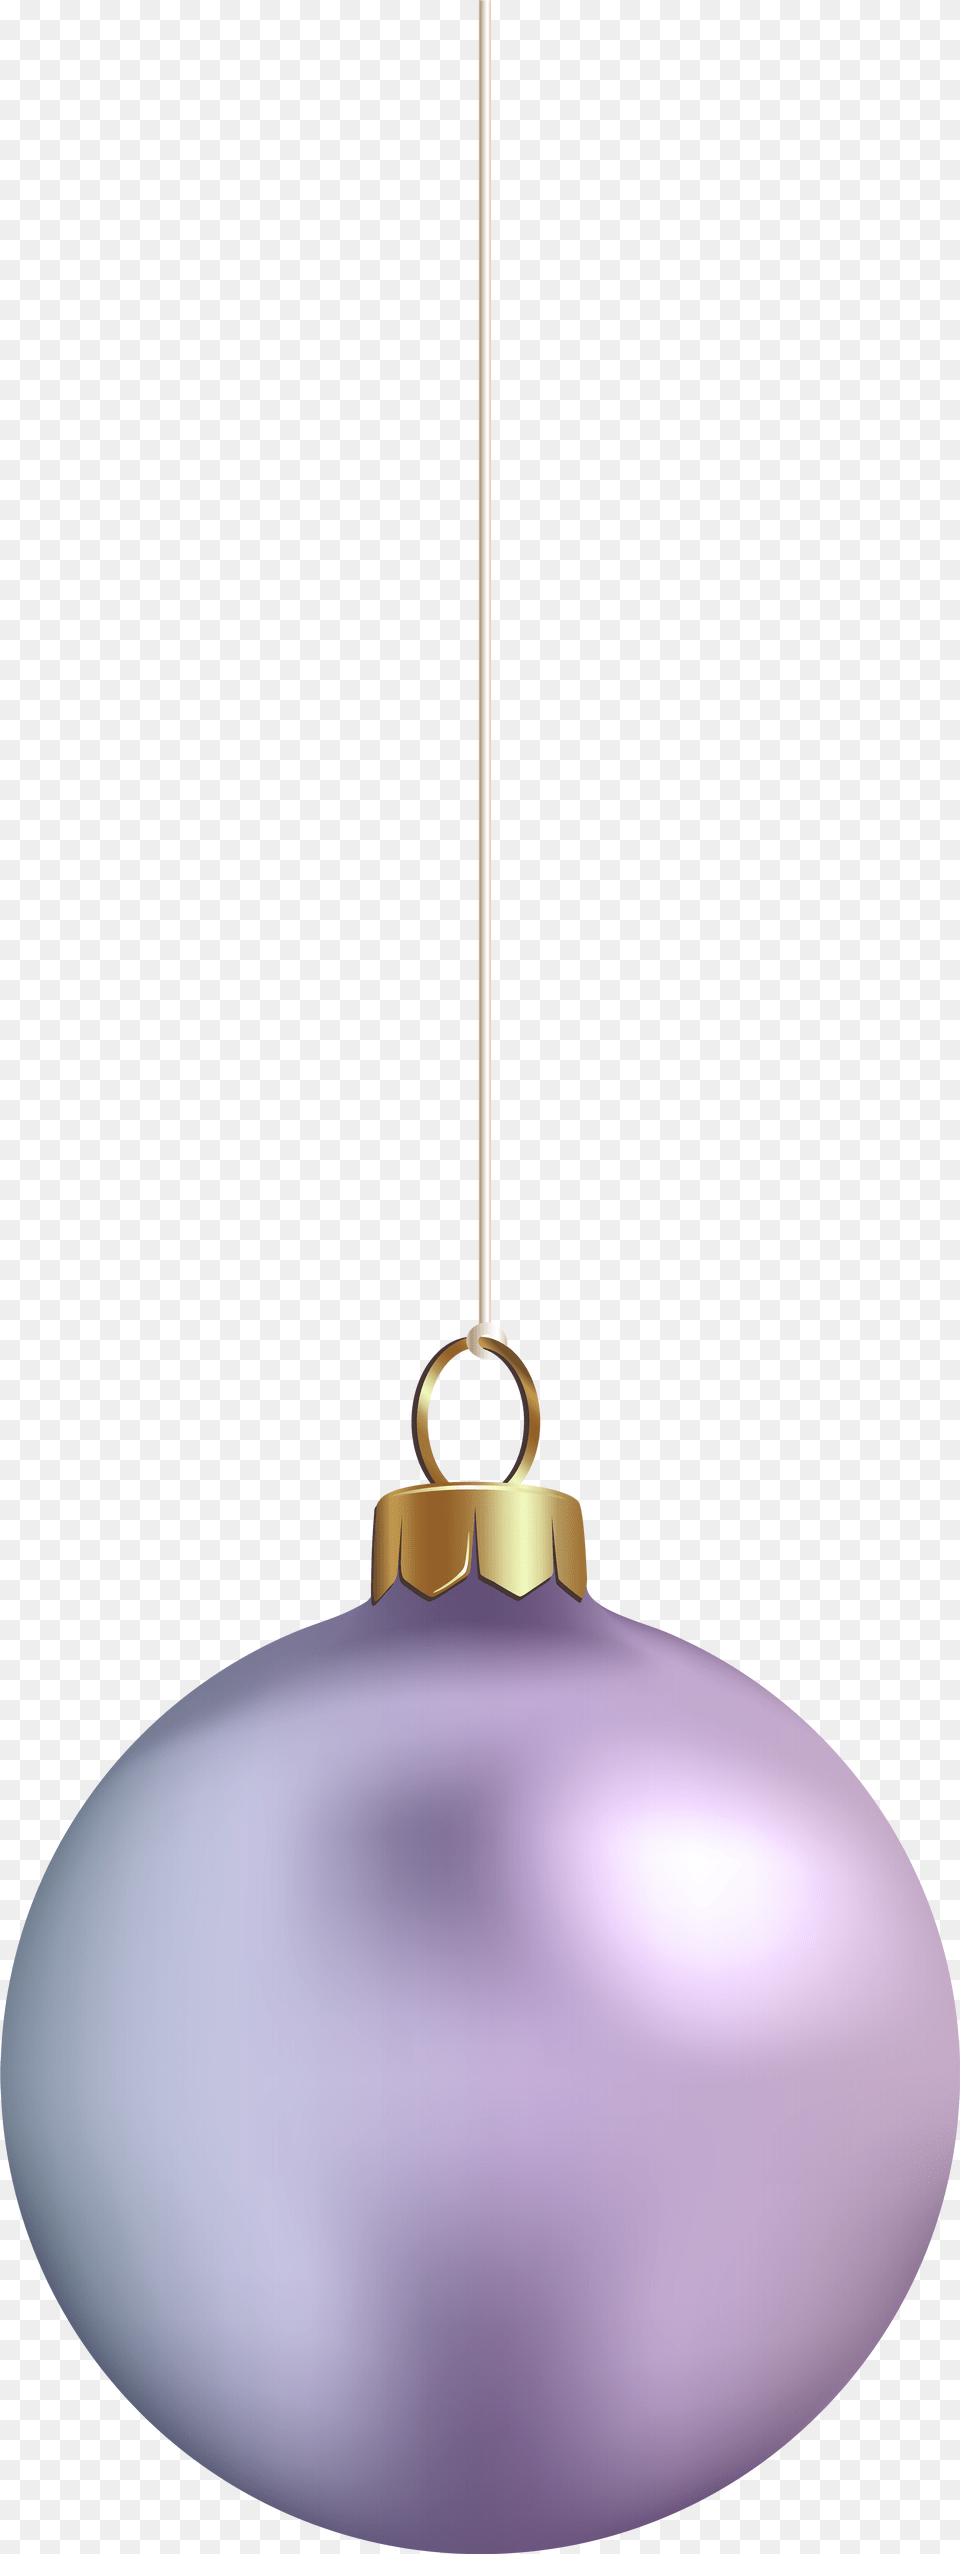 Smiley Silence Download Christmas Ornament, Accessories, Lighting, Jewelry, Earring Free Png